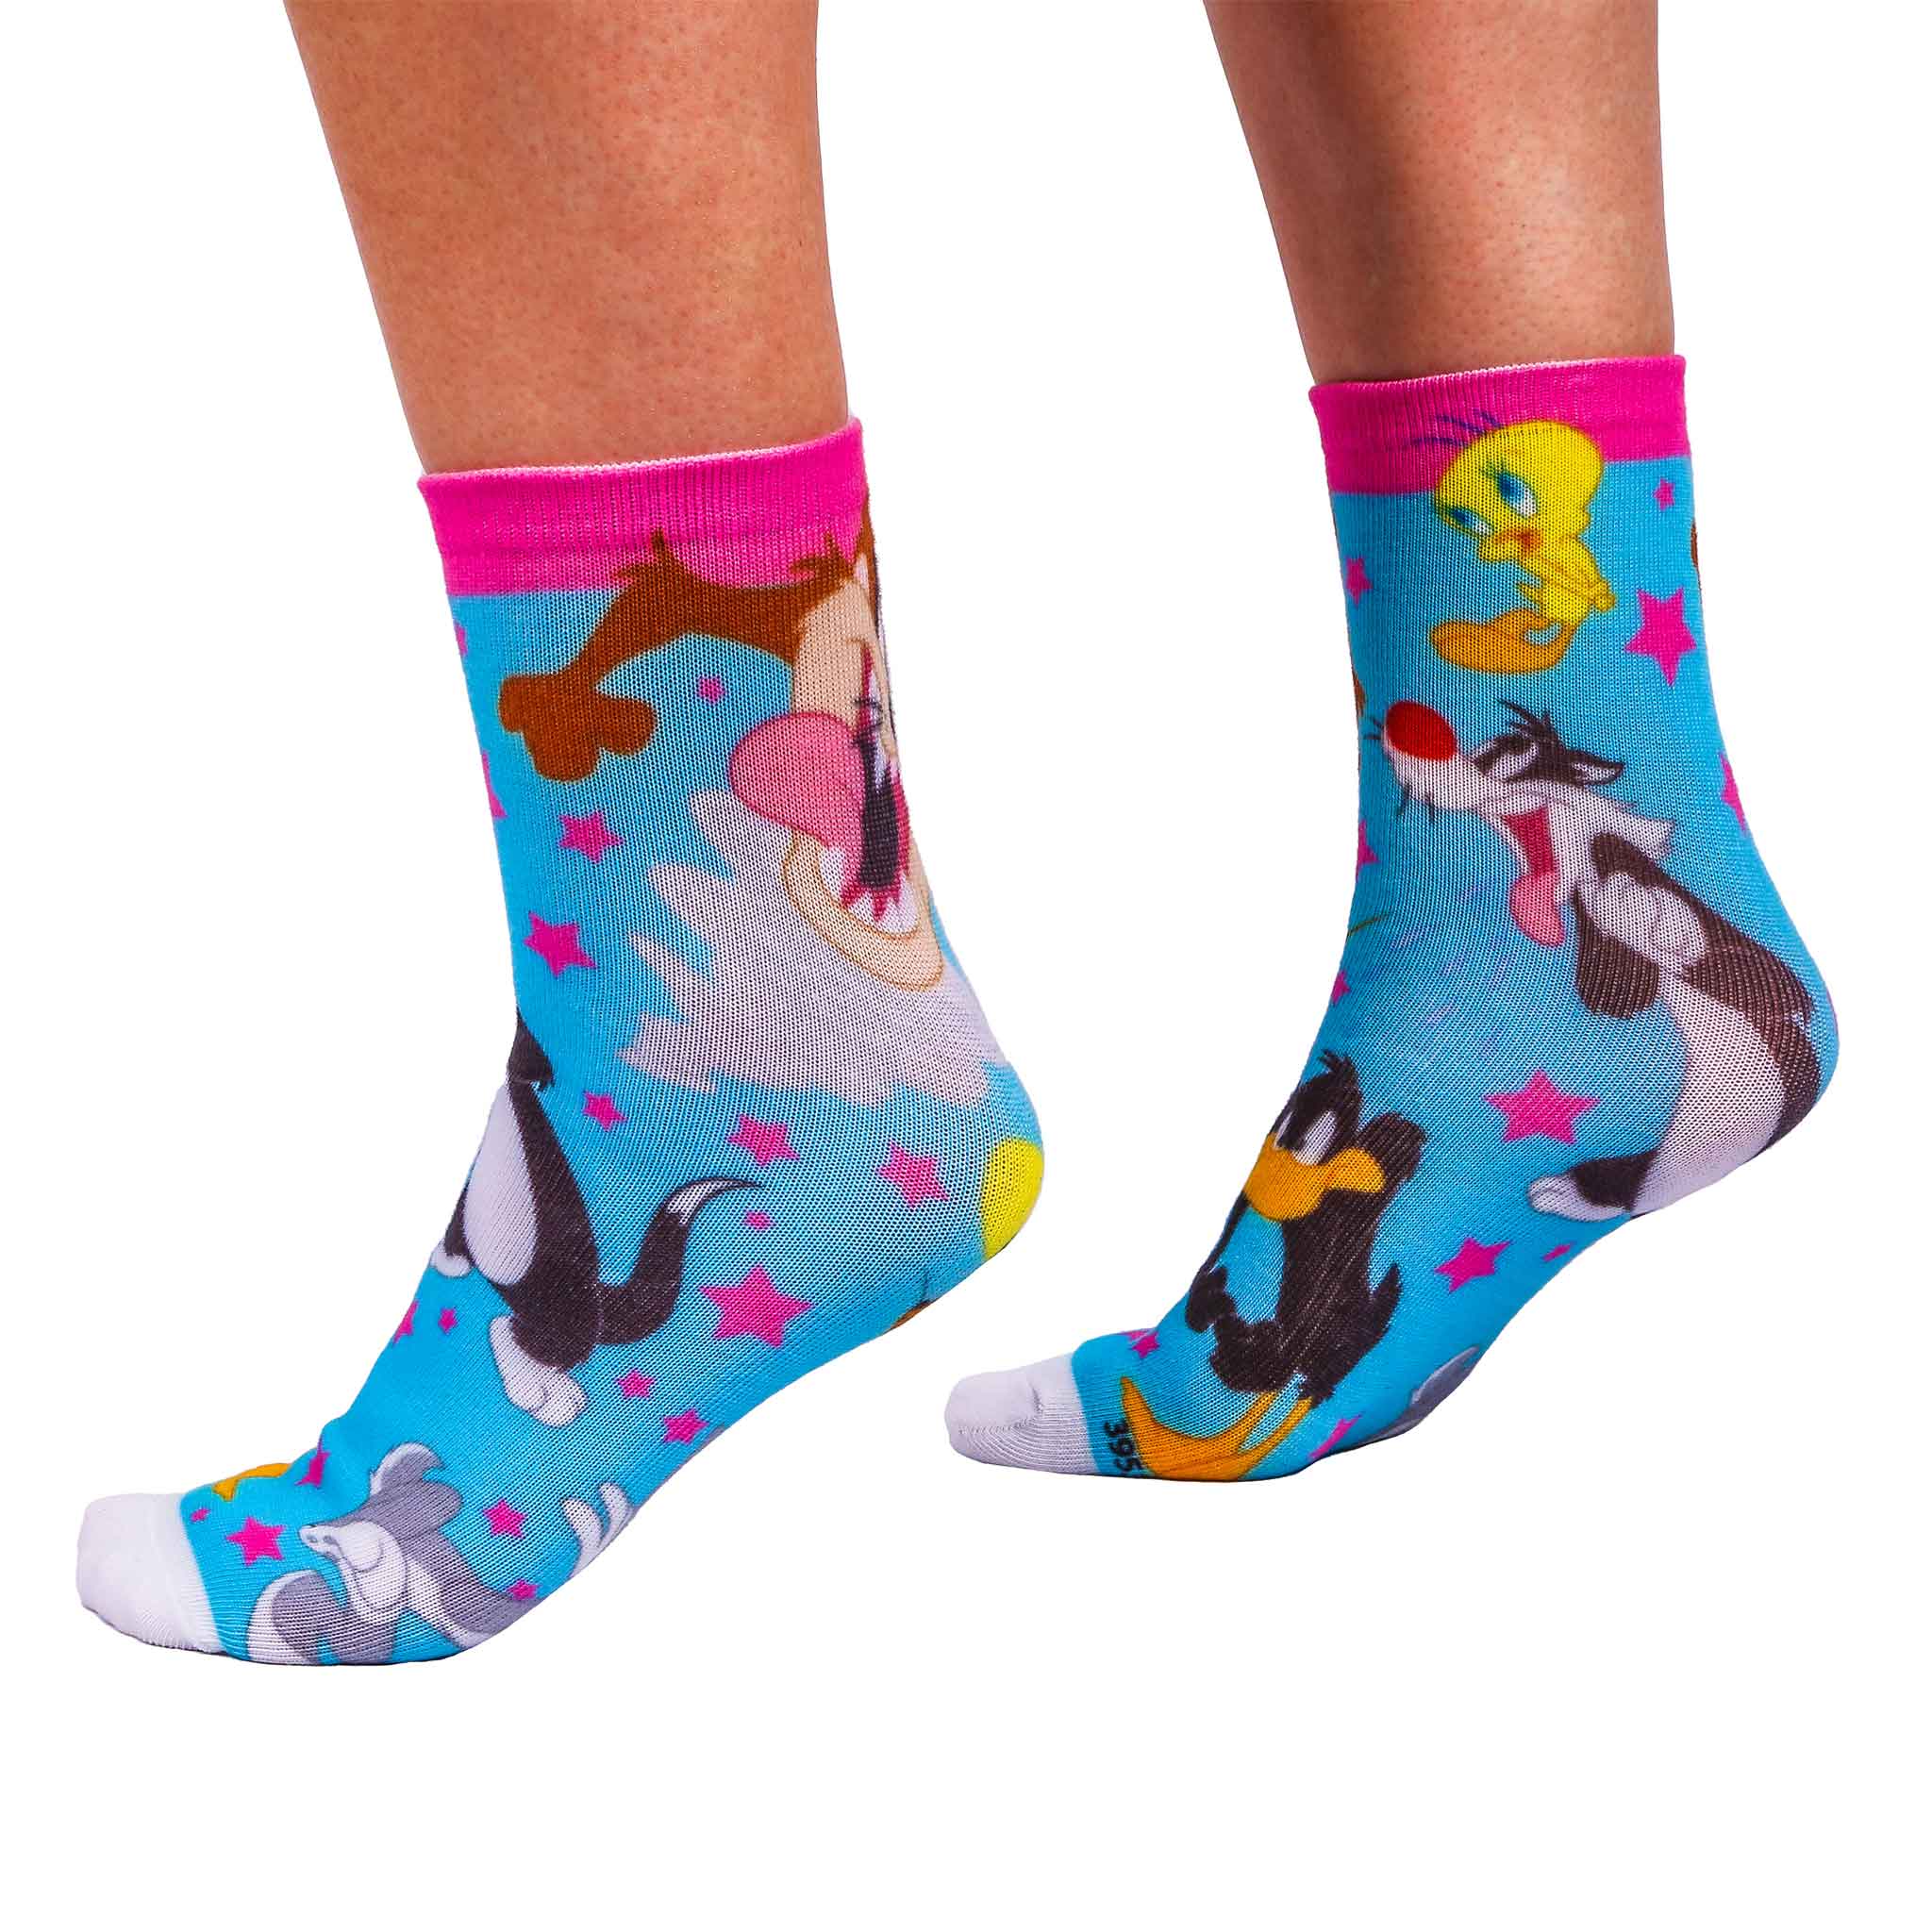 Bright blue socks with Looney Tunes characters Tweety Bird, Taz of Tasmania, Sylvester the Cat, Daffy Duck, and Bugs Bunny who are surrounded with pink stars and matching ankle band.